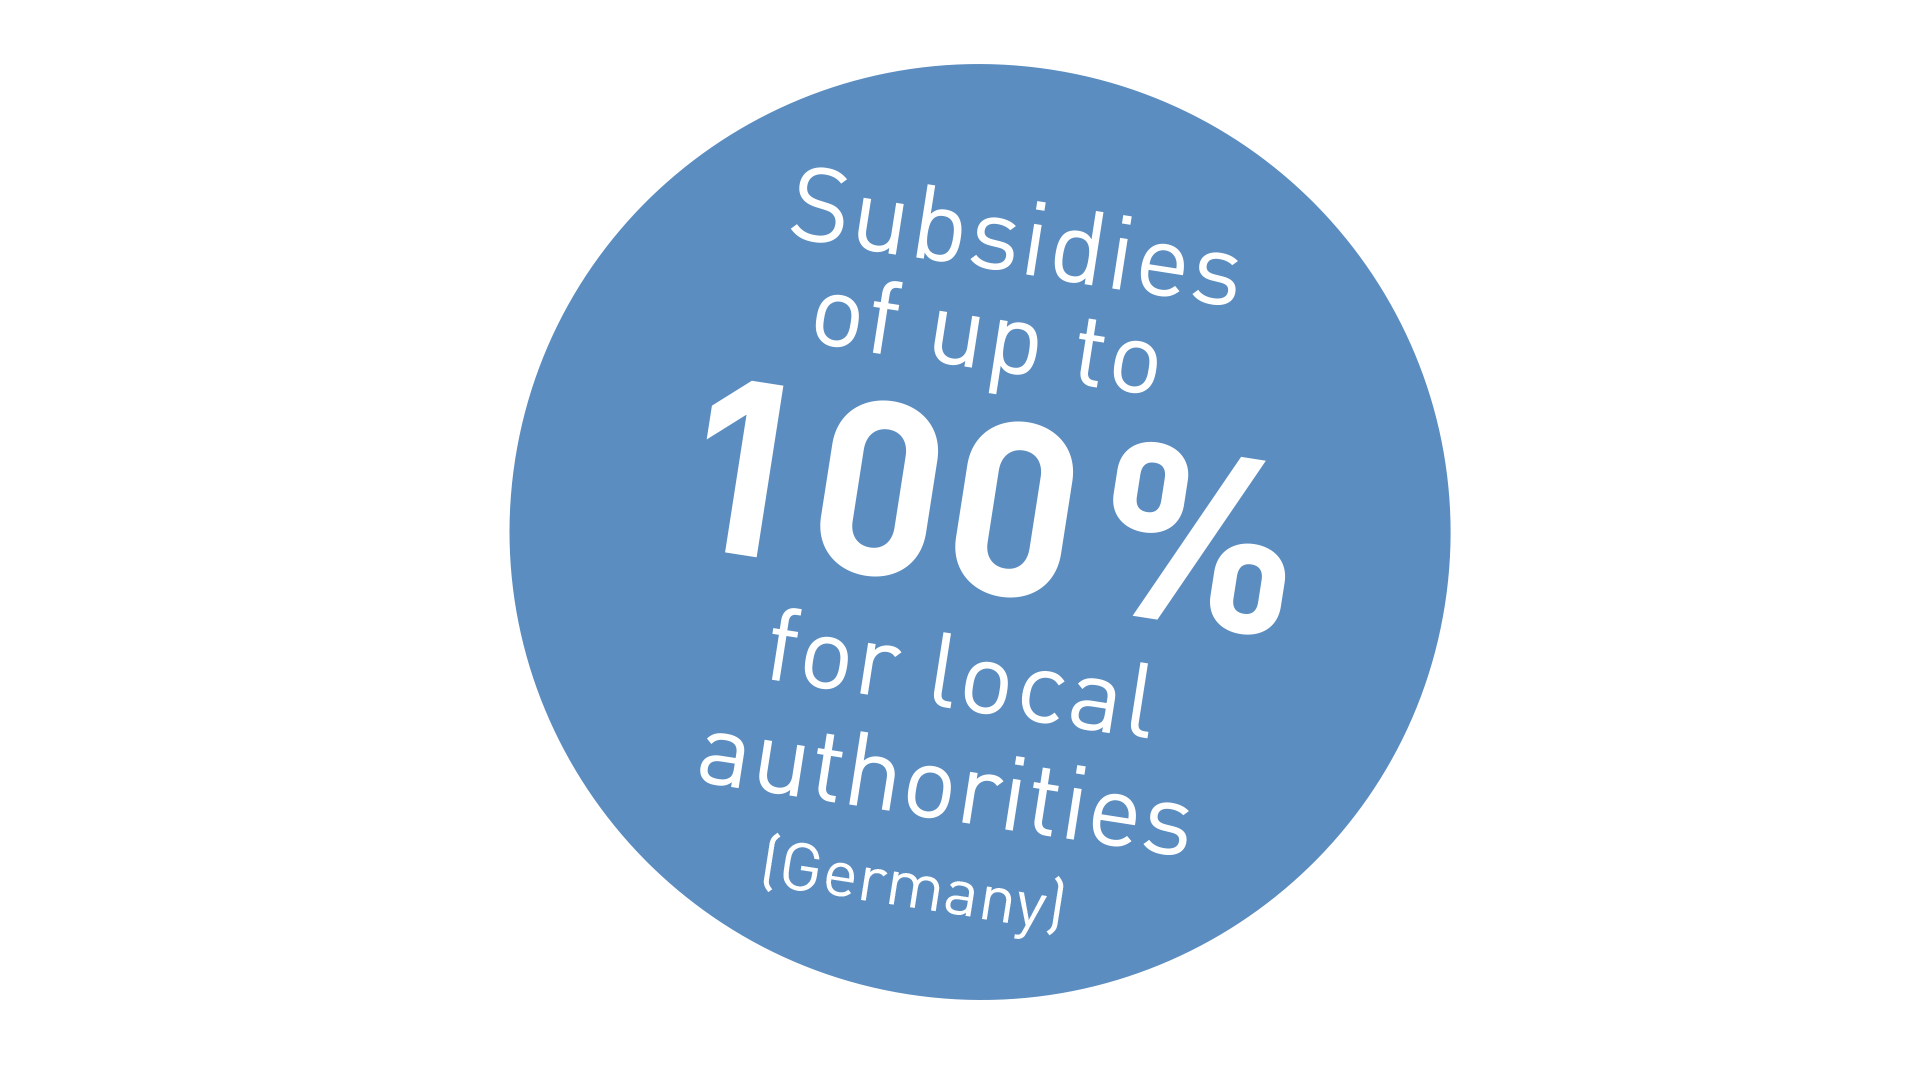 Subsidies for local authorities